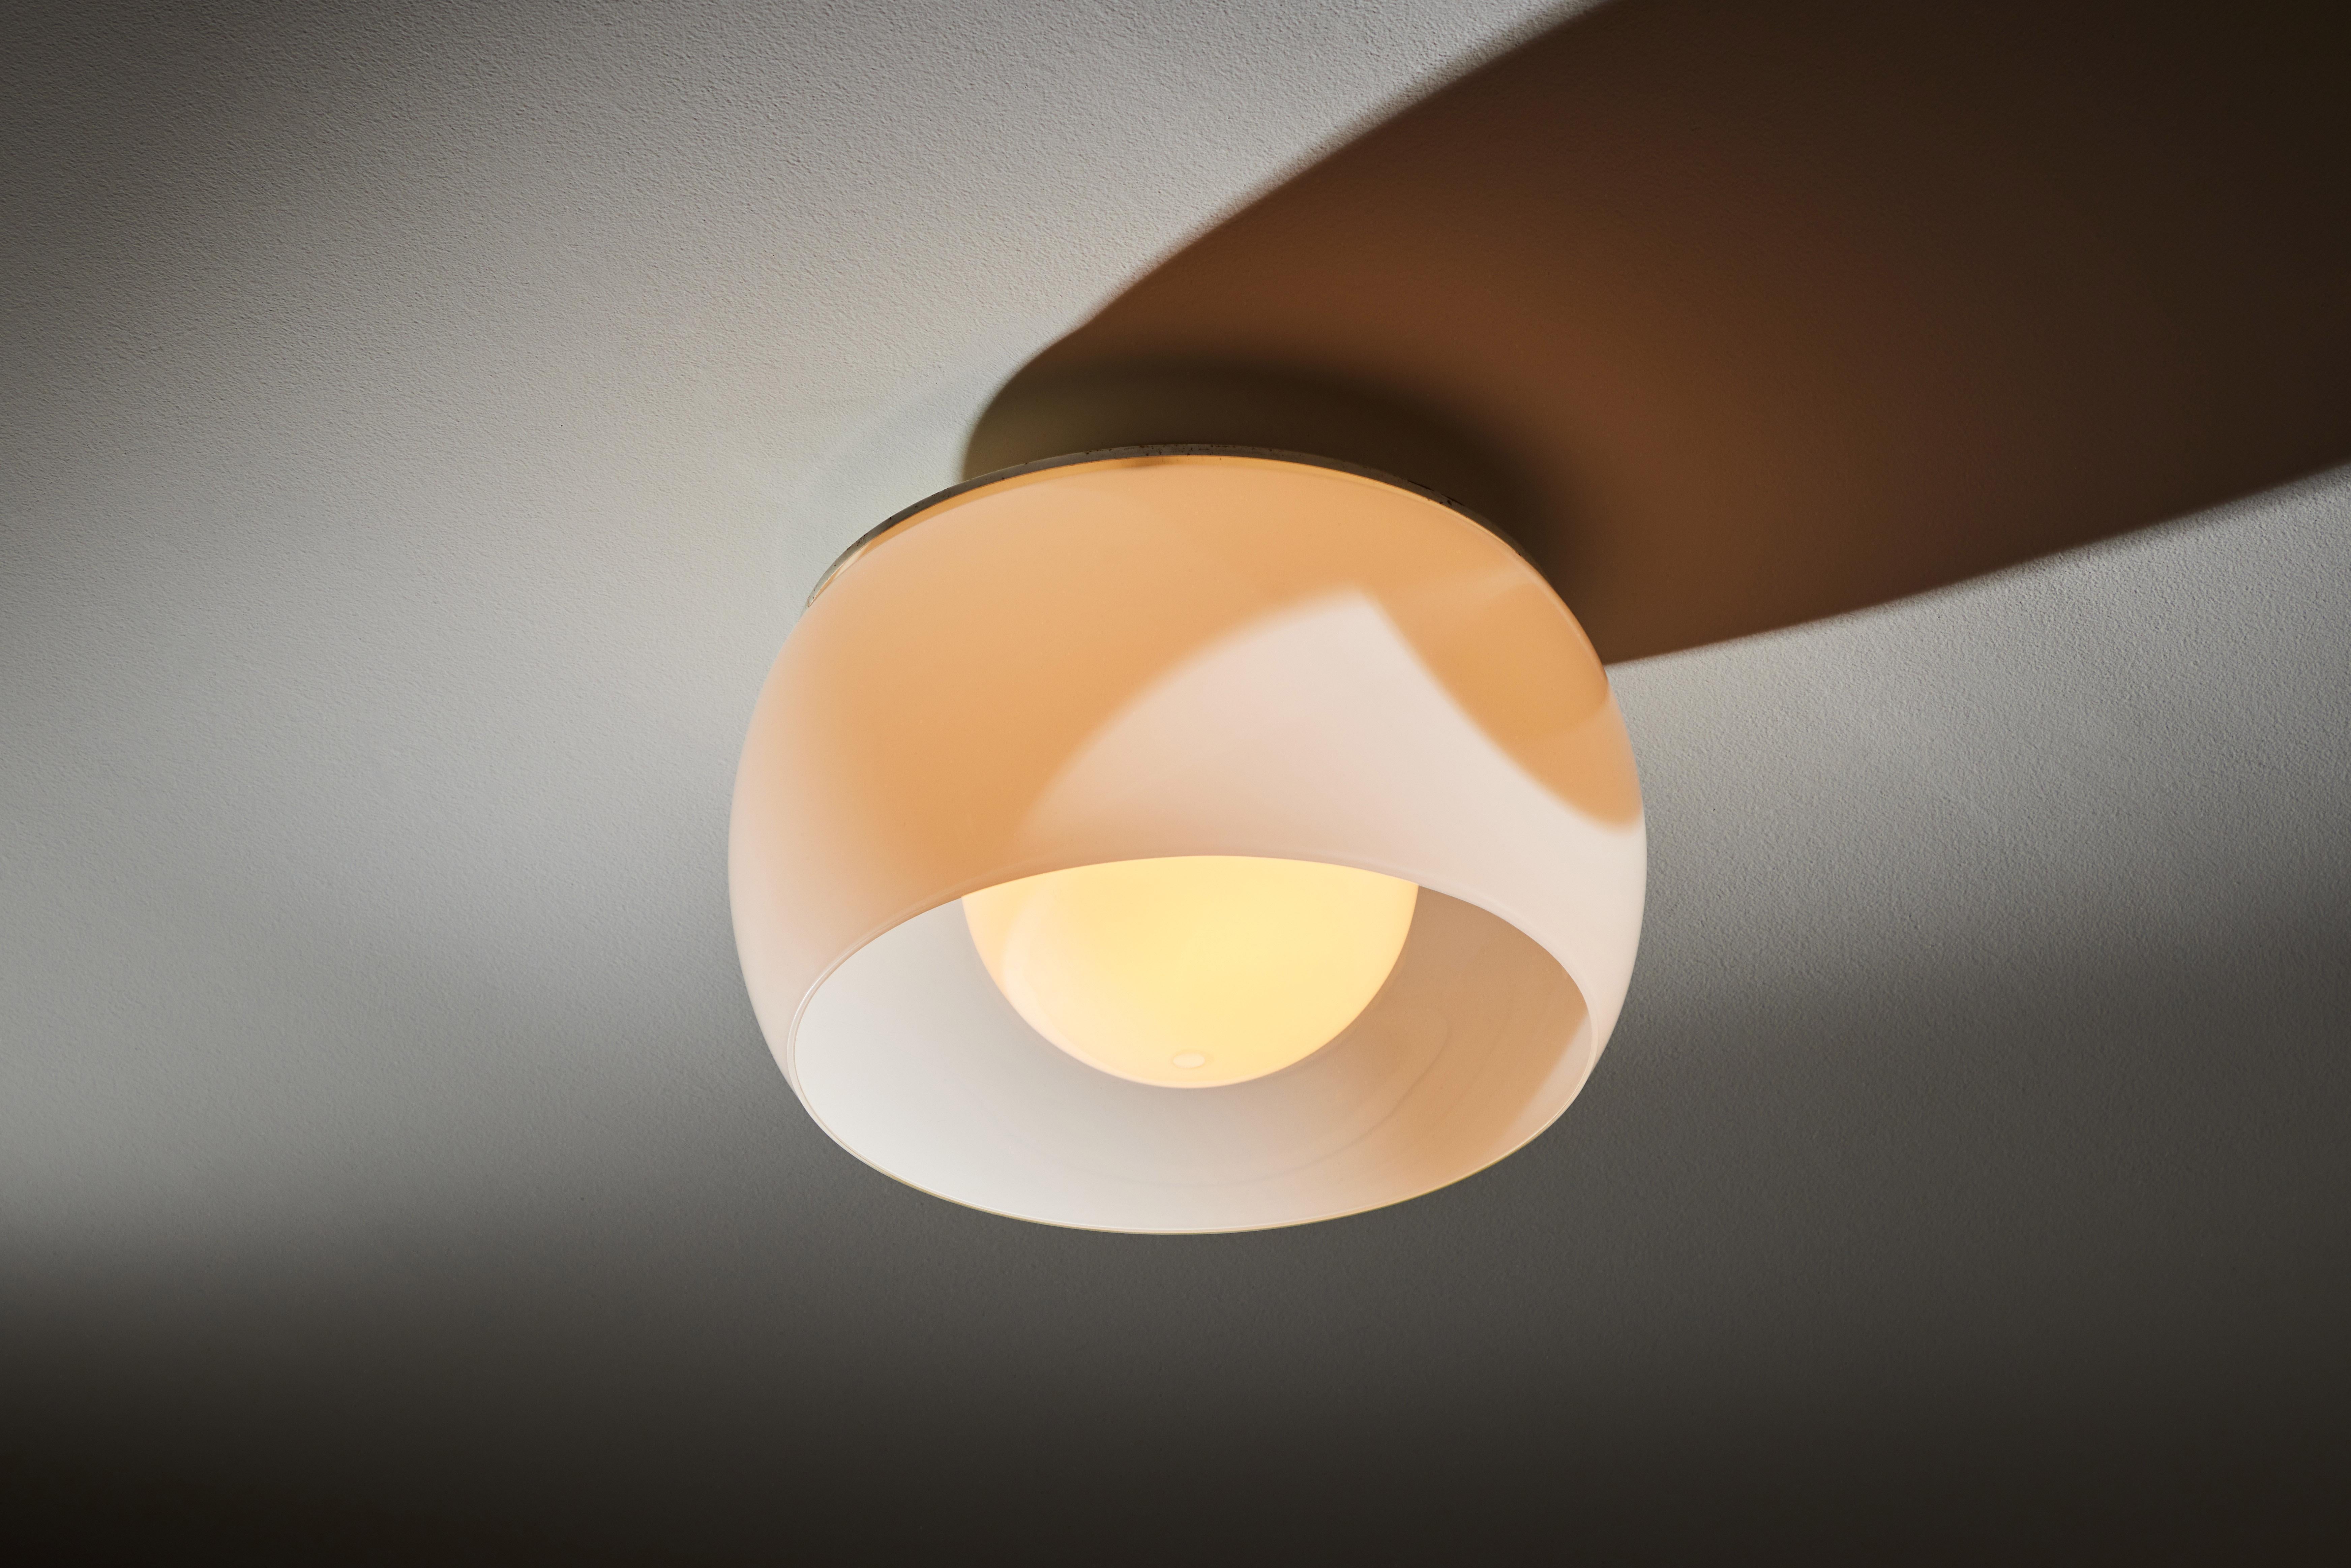 Mid-Century Modern Clinio Flush Mount Ceiling Light by Vico Magistretti for Artemide